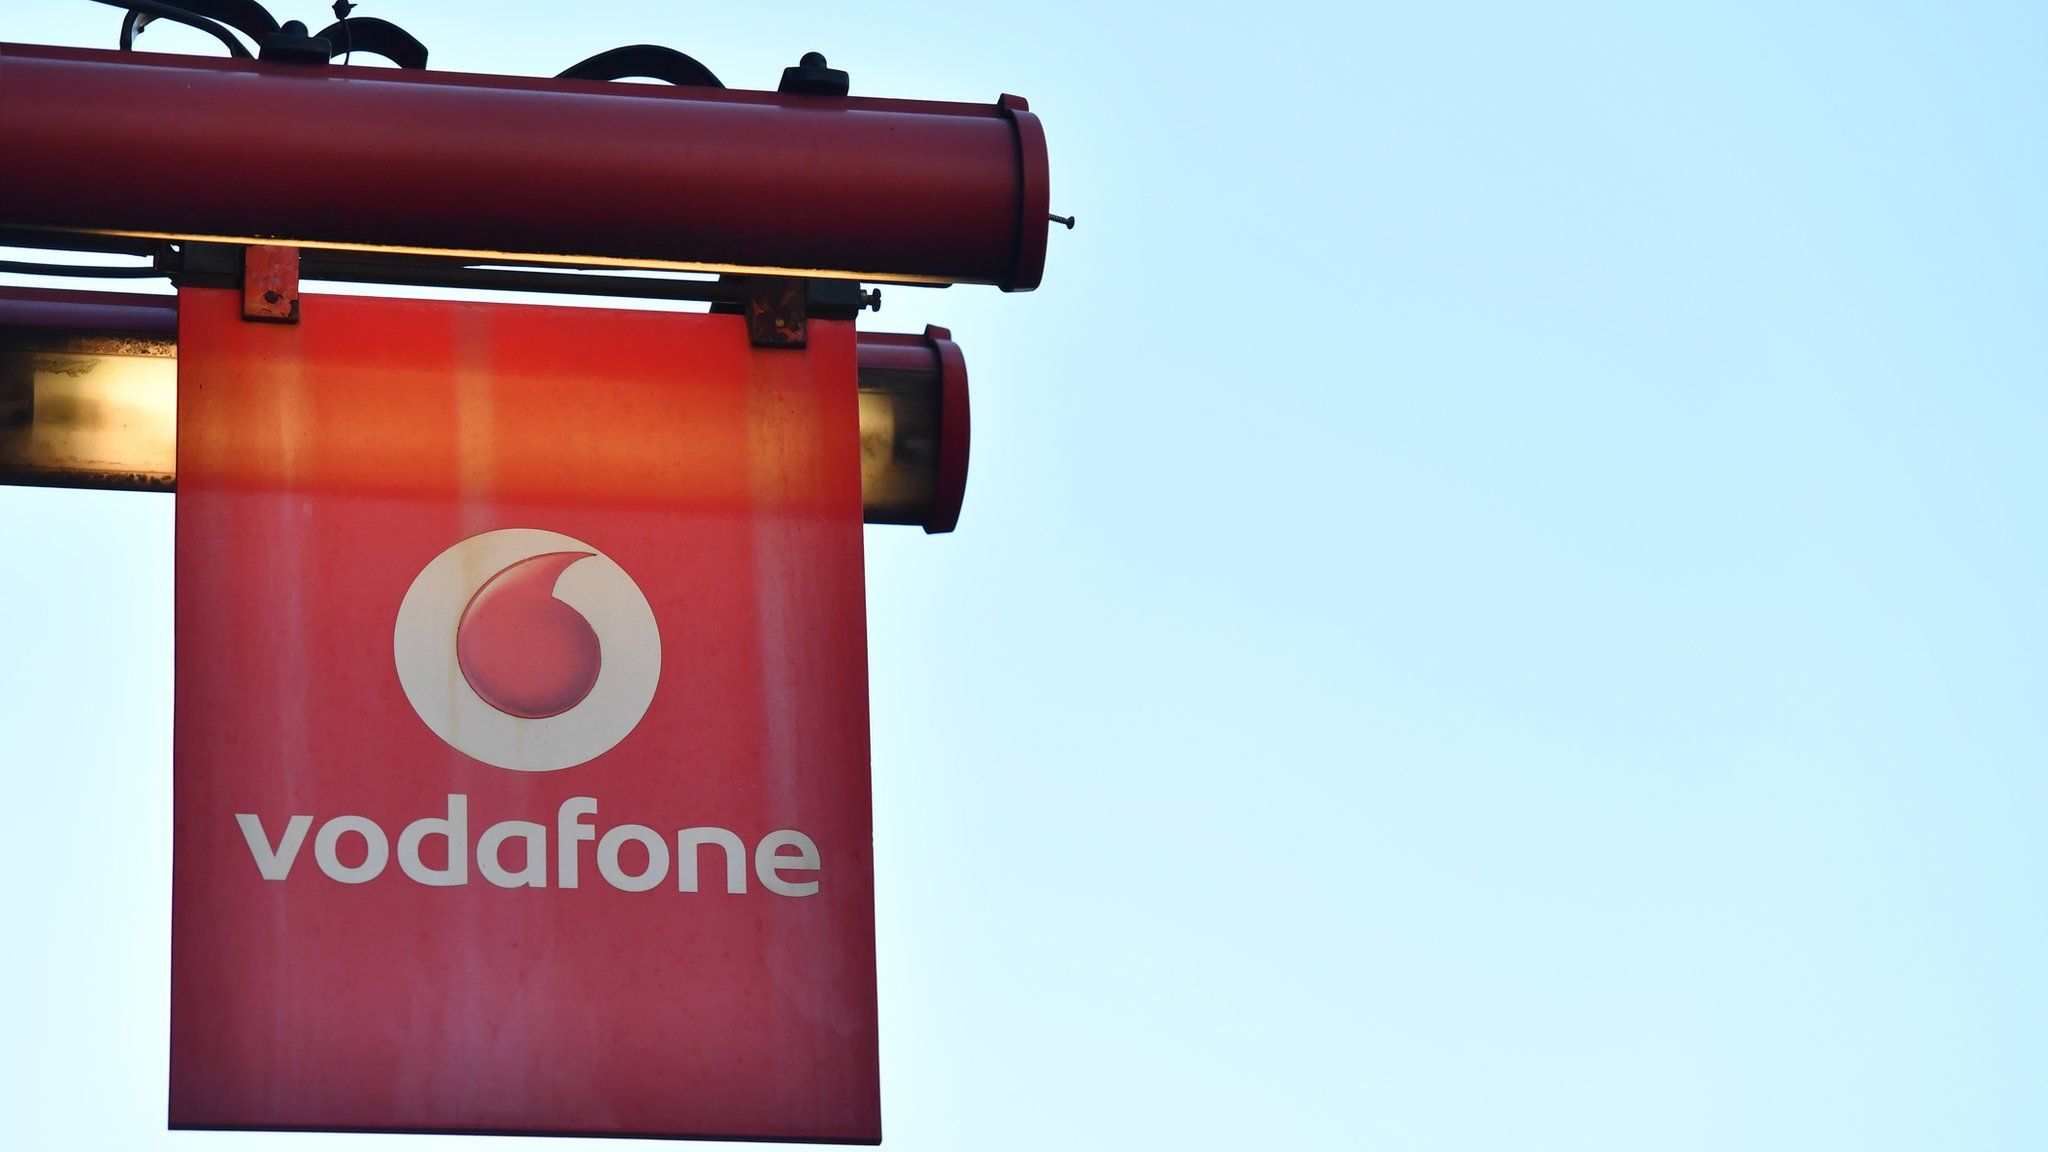 Vodafone Mobile Connection for Corporate